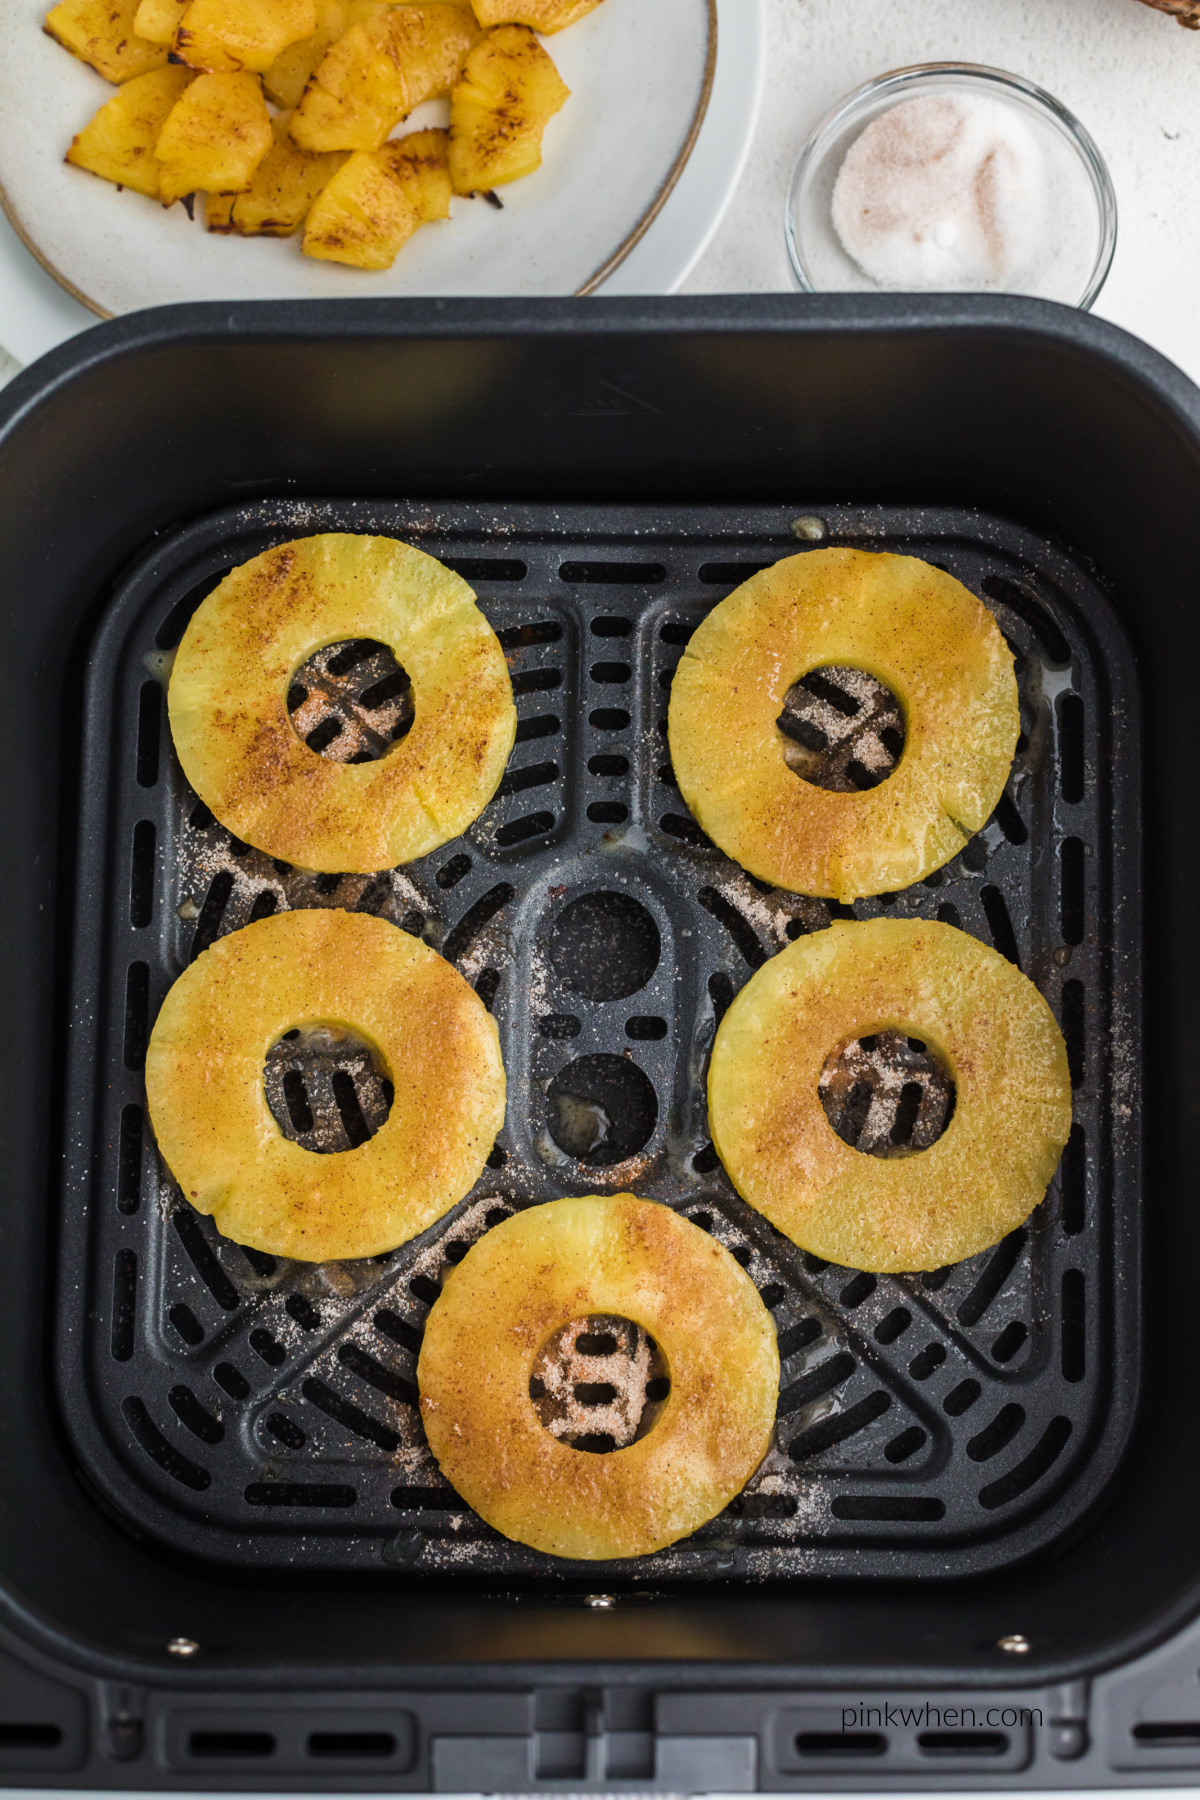 Pineapple rings sprinkled with cinnamon and sugar in the basket of the air fryer.